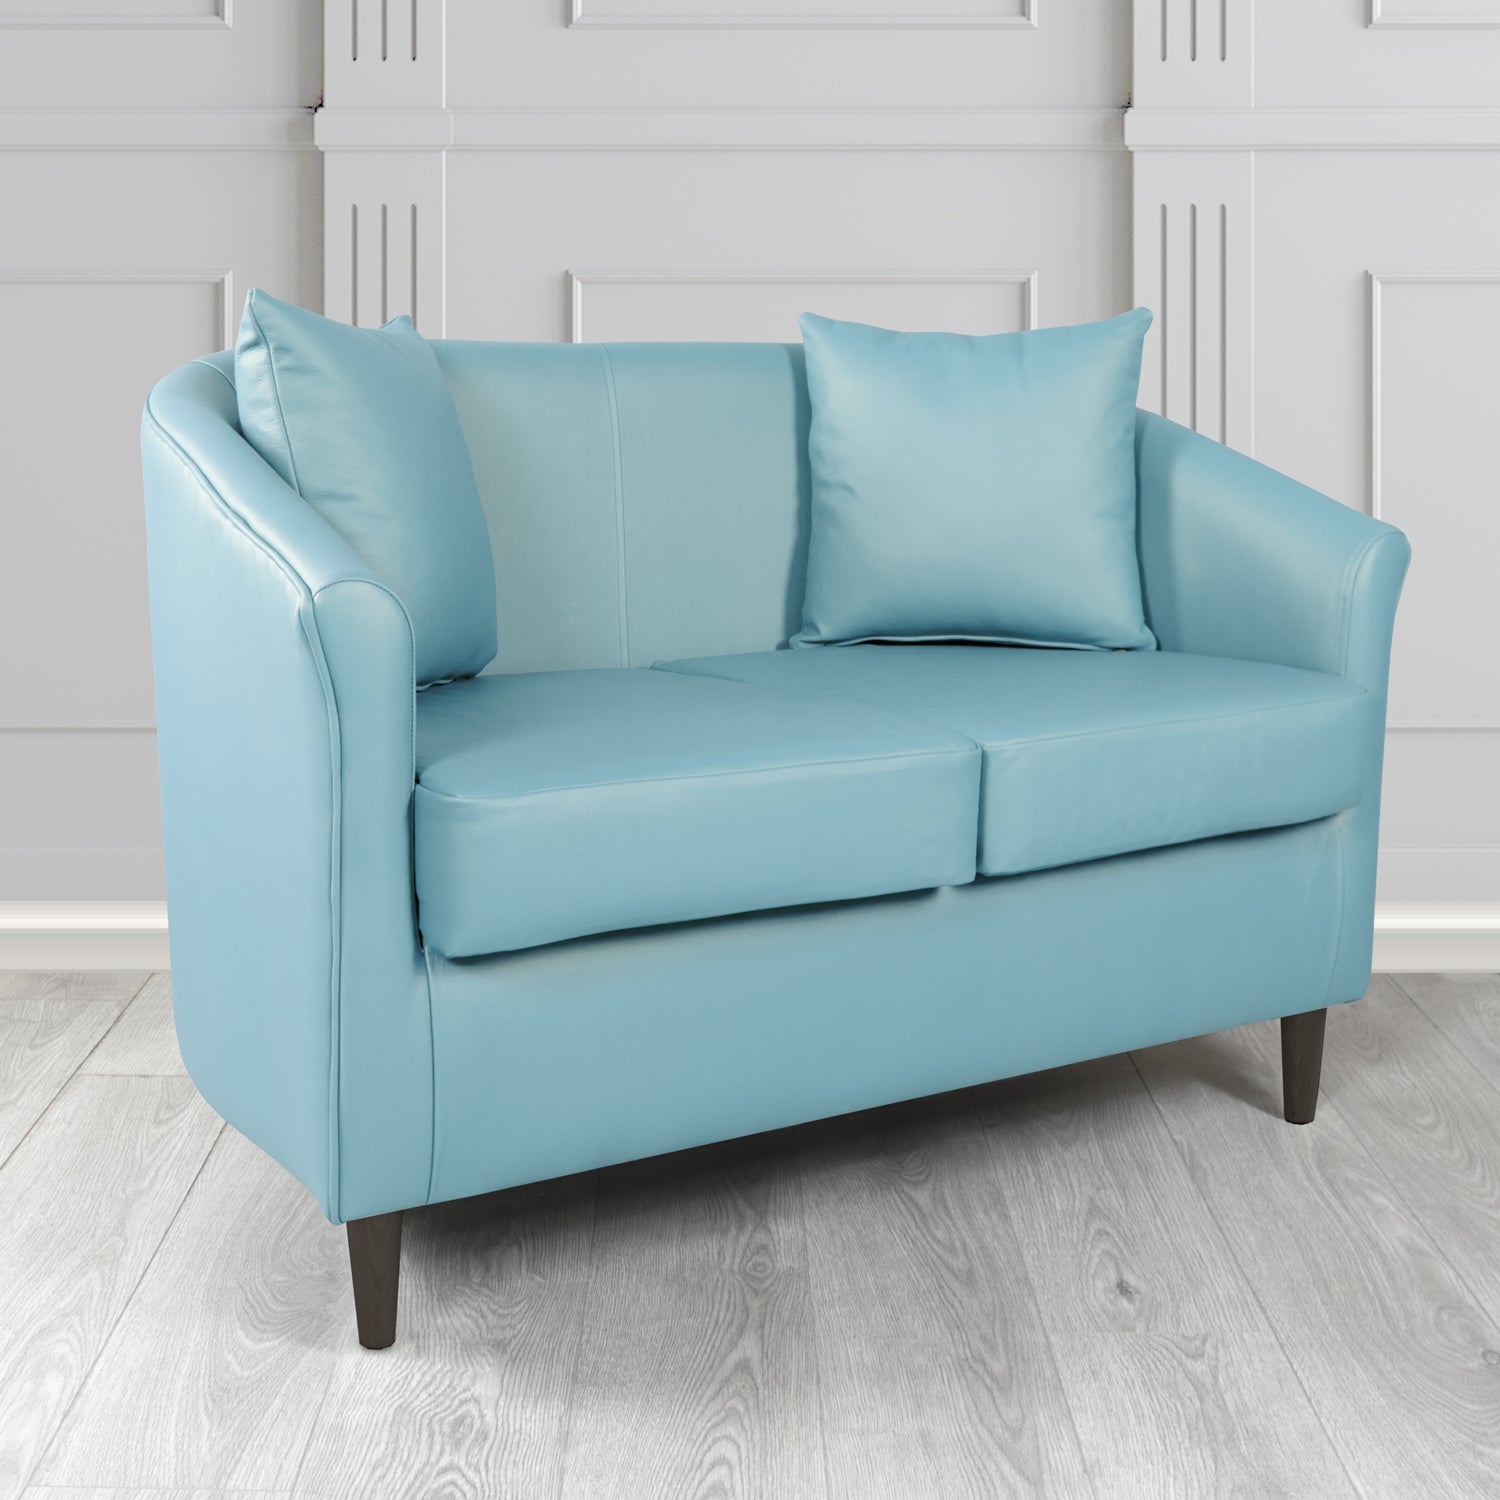 St Tropez Shelly Haze Crib 5 Genuine Leather 2 Seater Tub Sofa with Scatter Cushions - The Tub Chair Shop